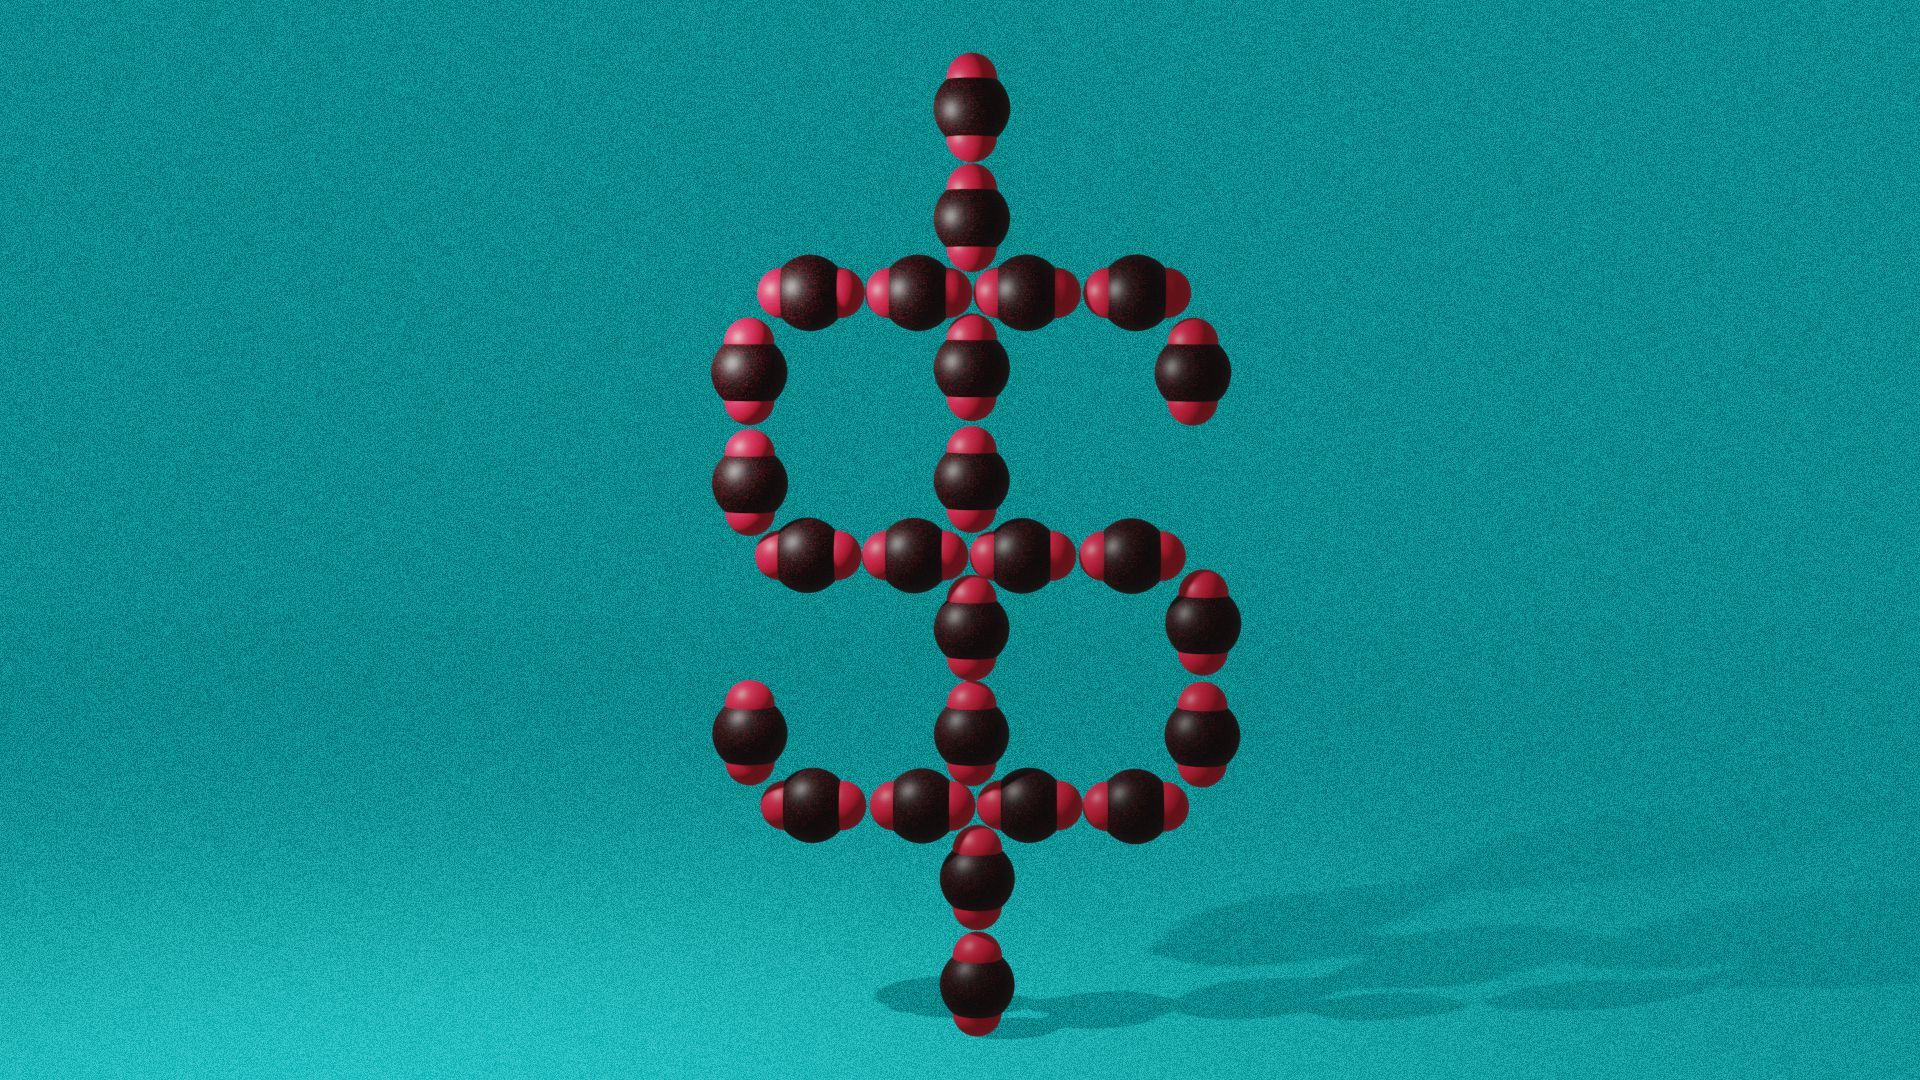 Illustration of a dollar sign made out of carbon molecules.